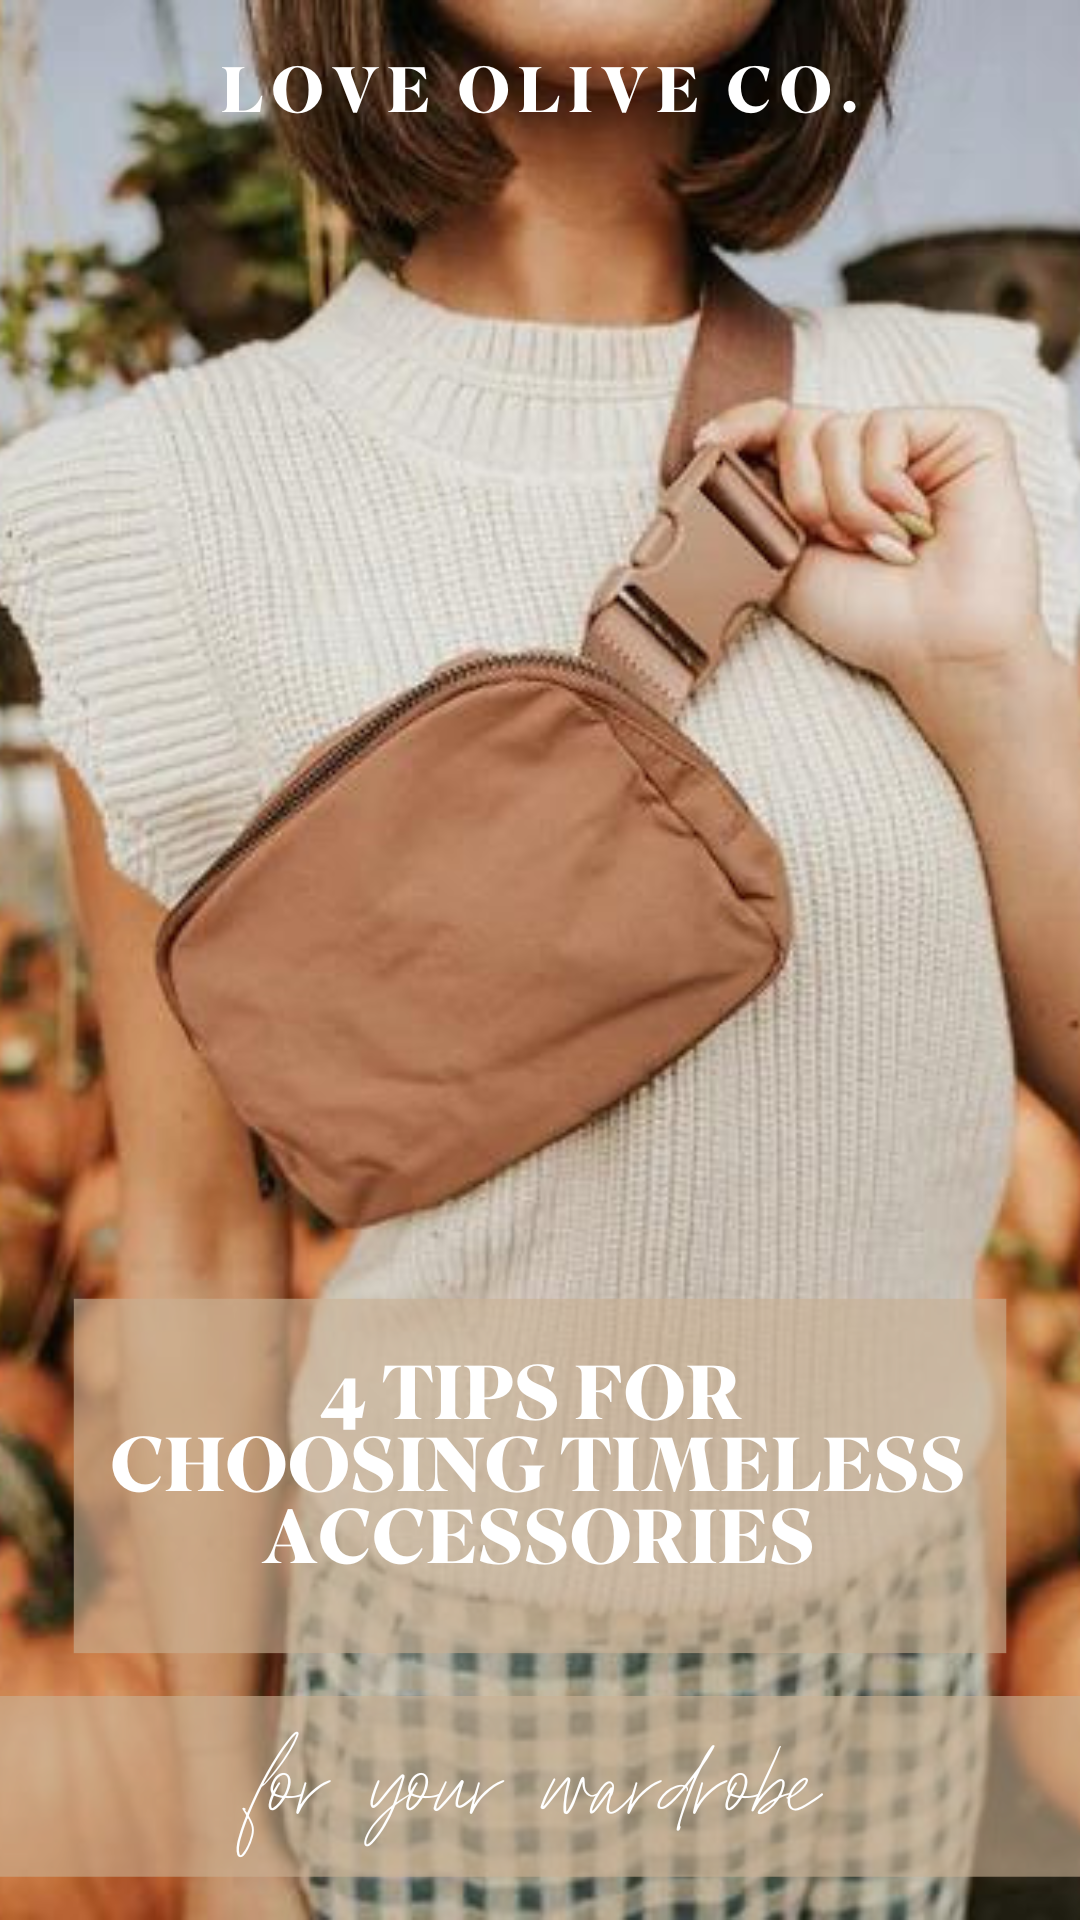 4 tips for choosing timeless accessories. www.loveoliveco.com